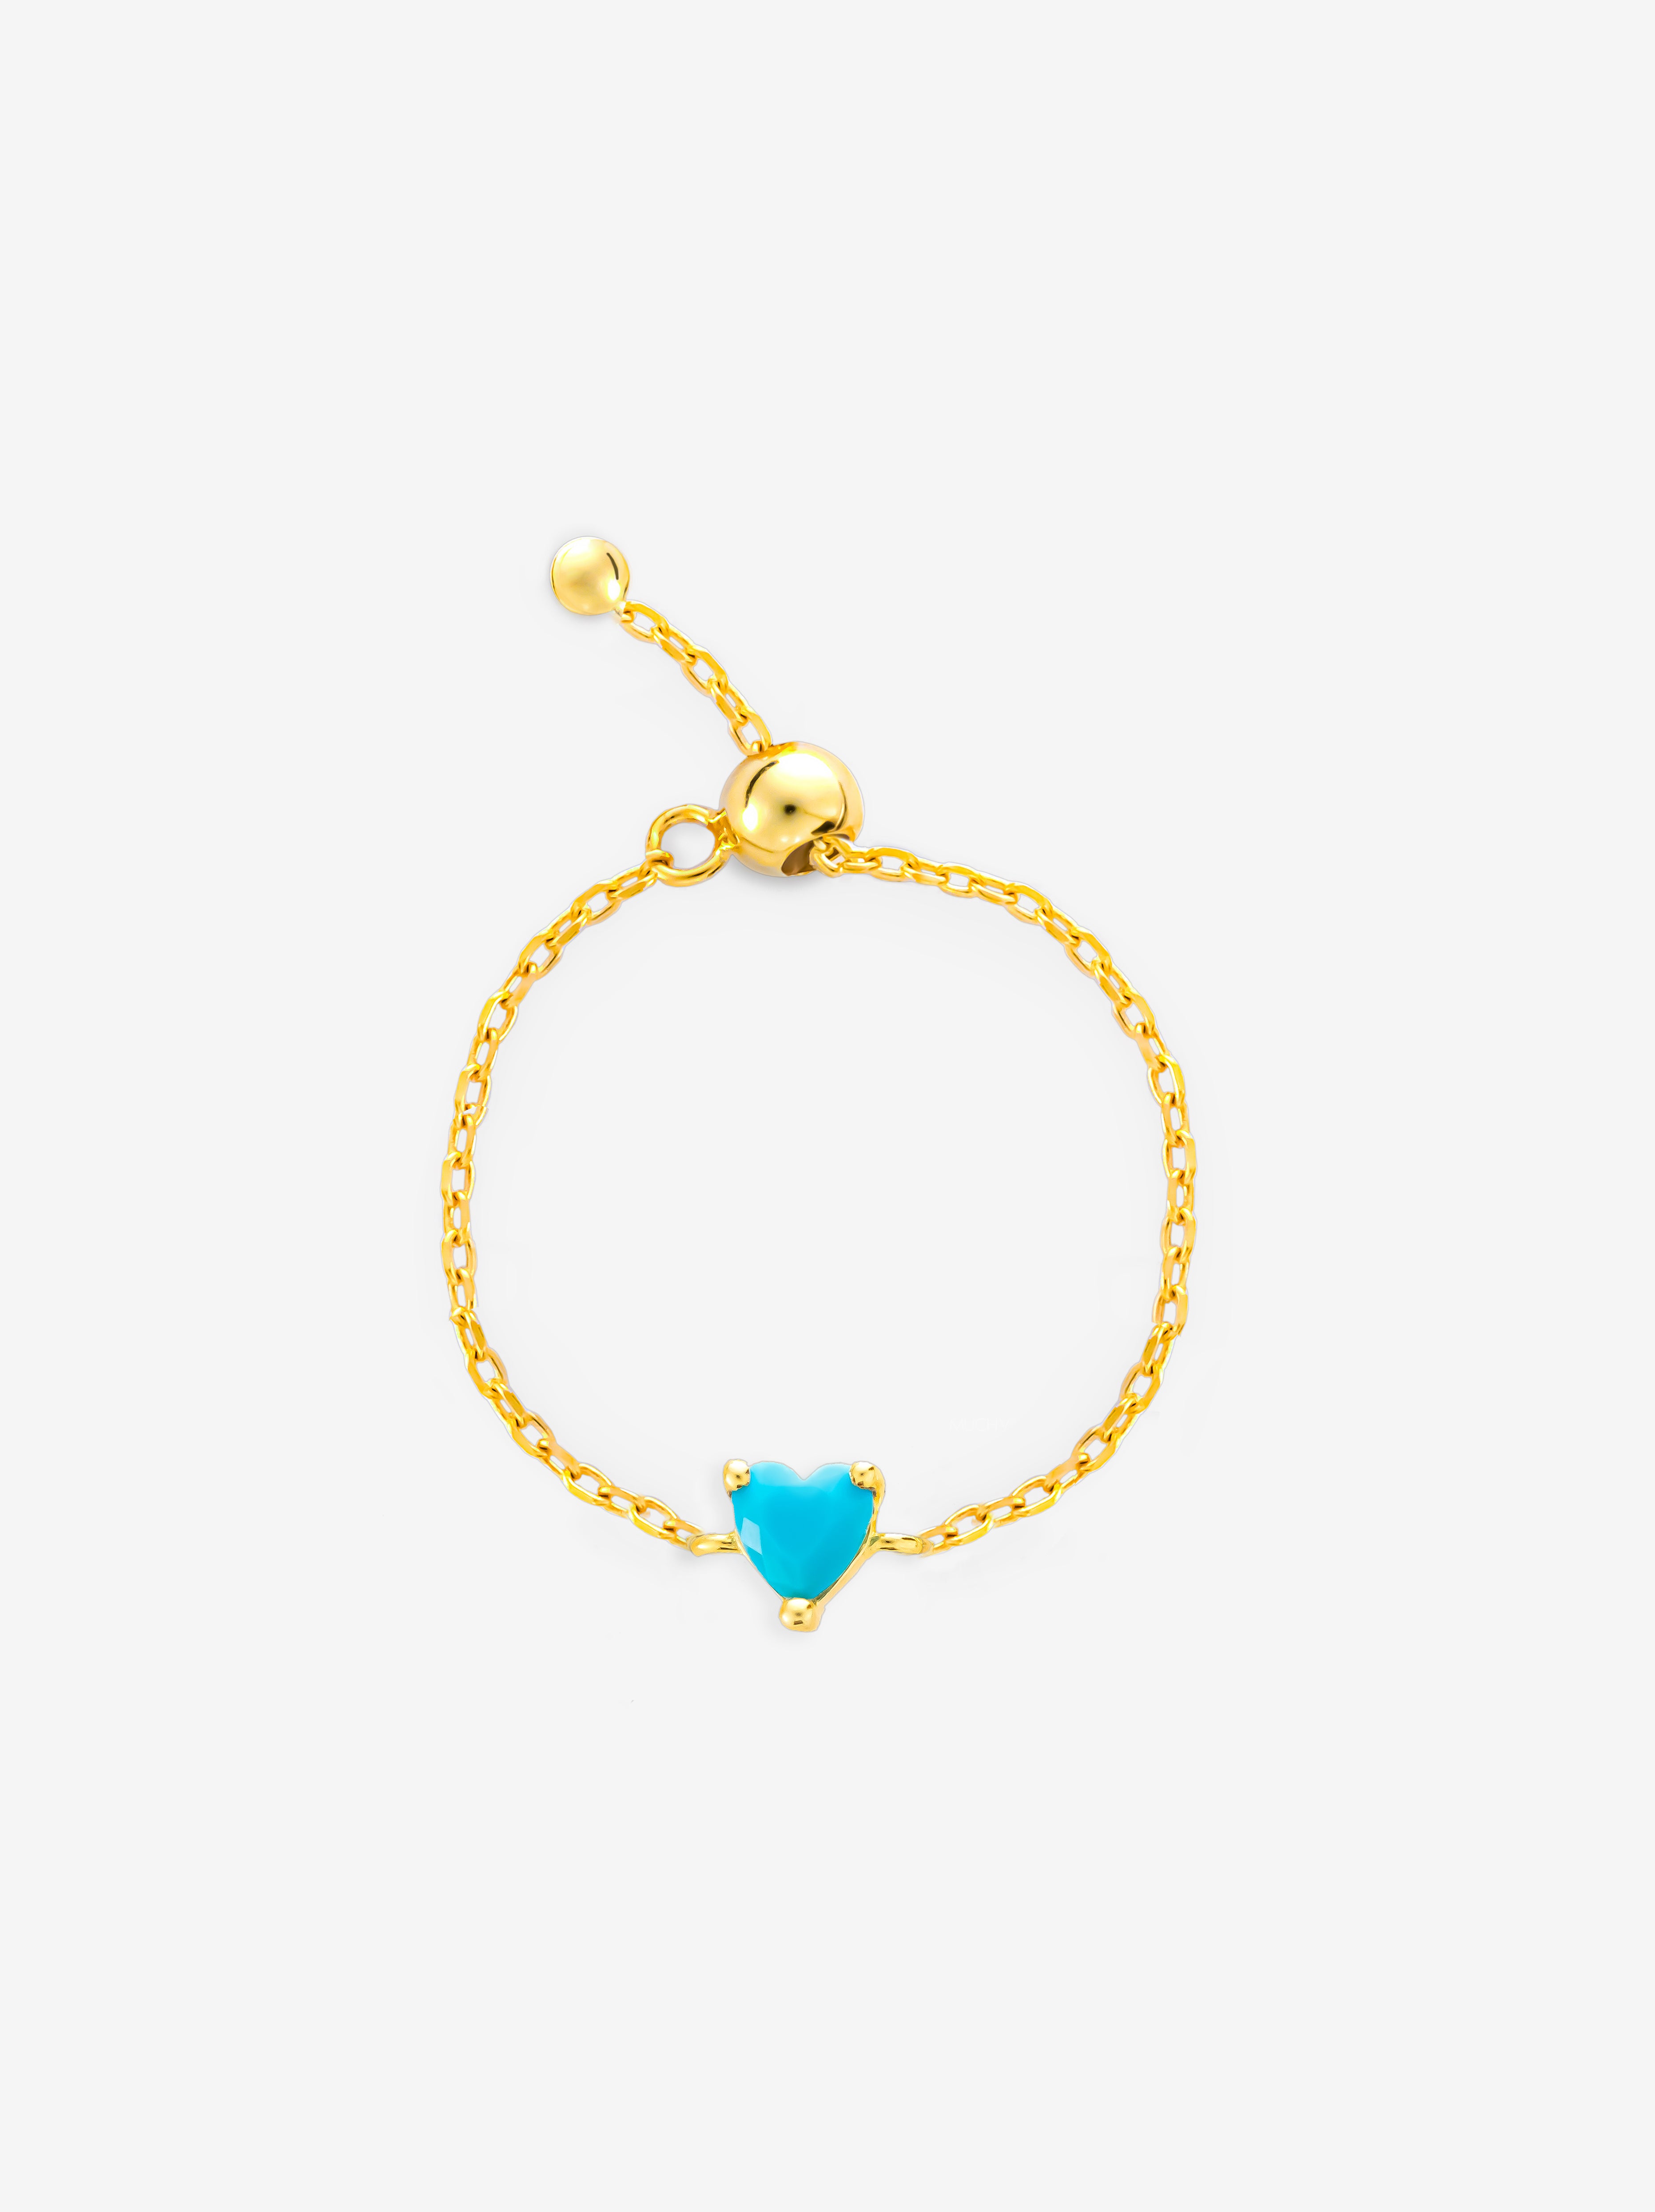 Gold Adjustable Chain Ring - Turquoise Heart